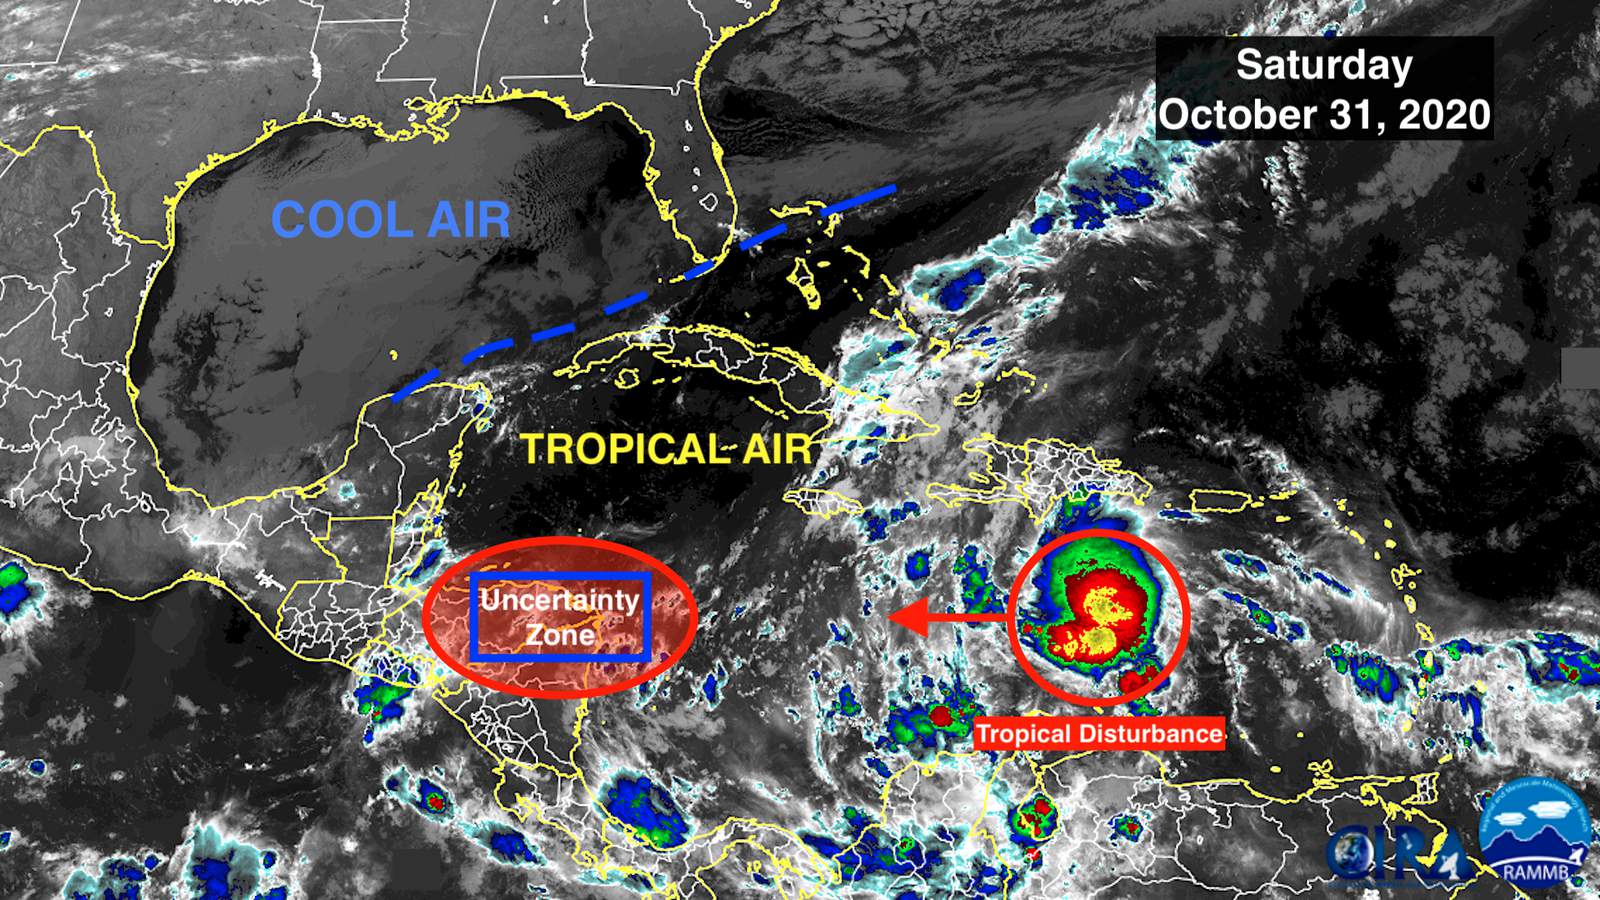 Caribbean disturbance is close to becoming a tropical depression or storm